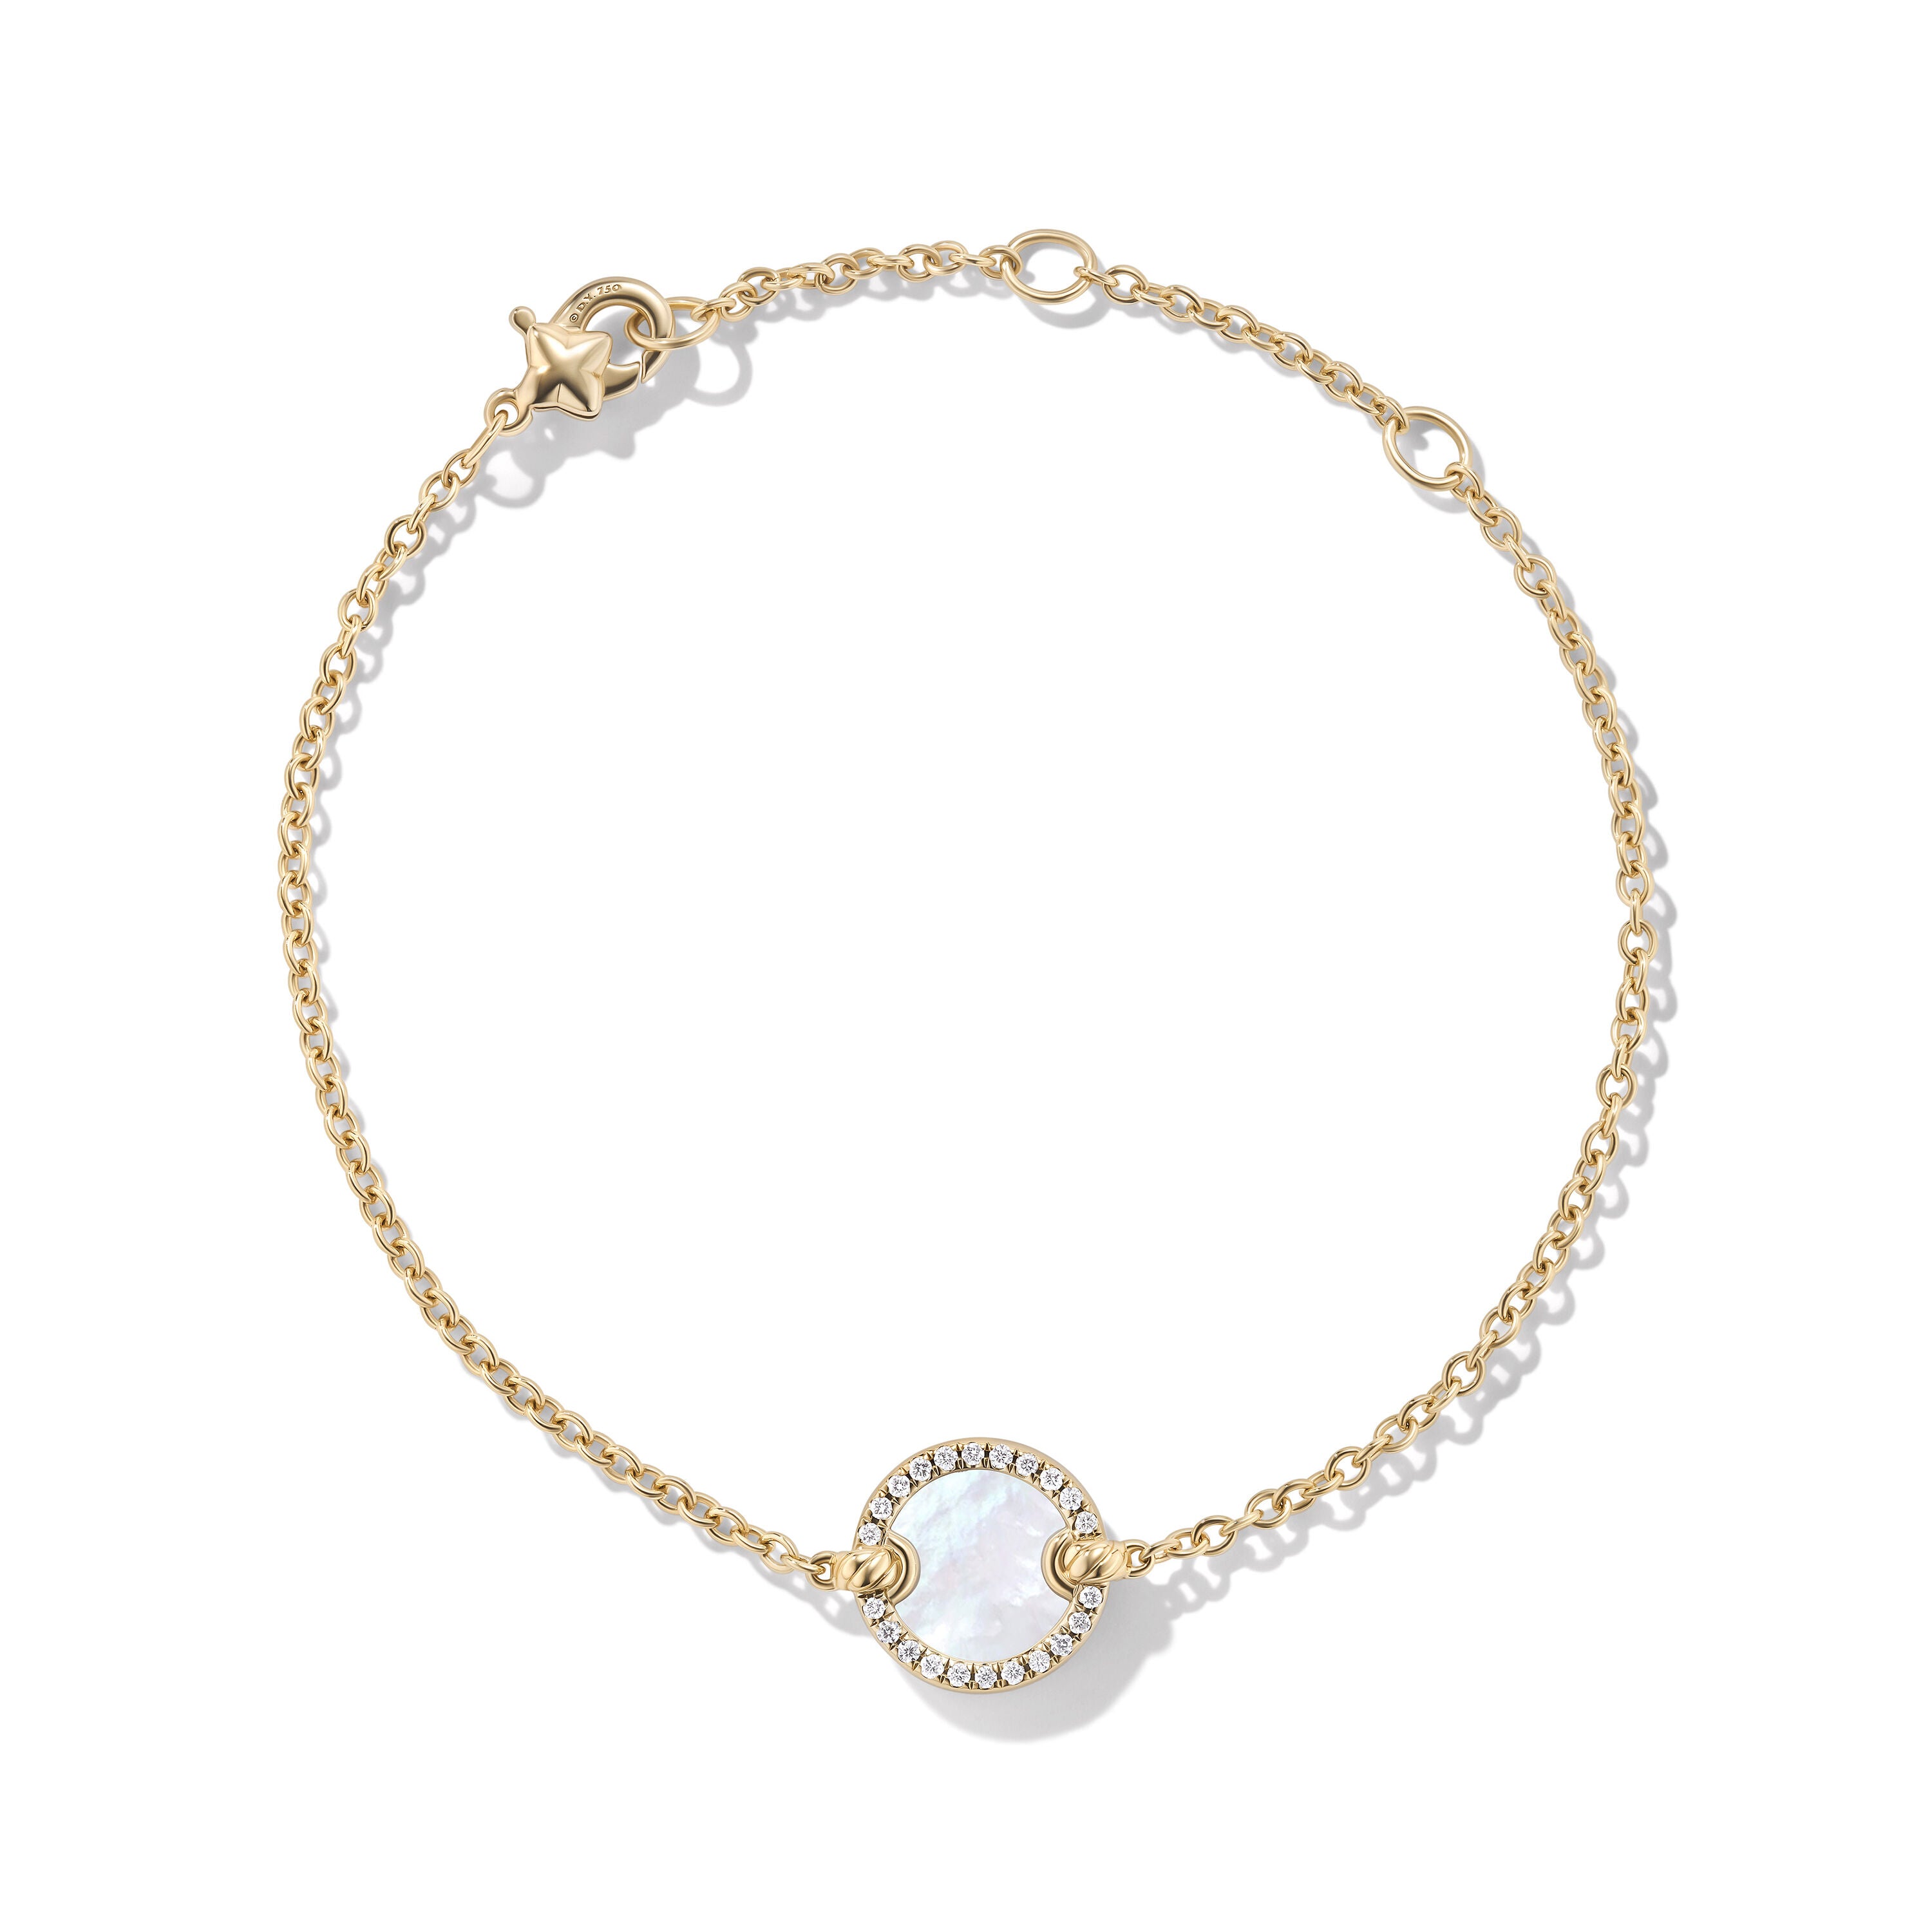 Petite DY Elements® Center Station Chain Bracelet in 18K Yellow Gold with Mother of Pearl and Pavé Diamonds